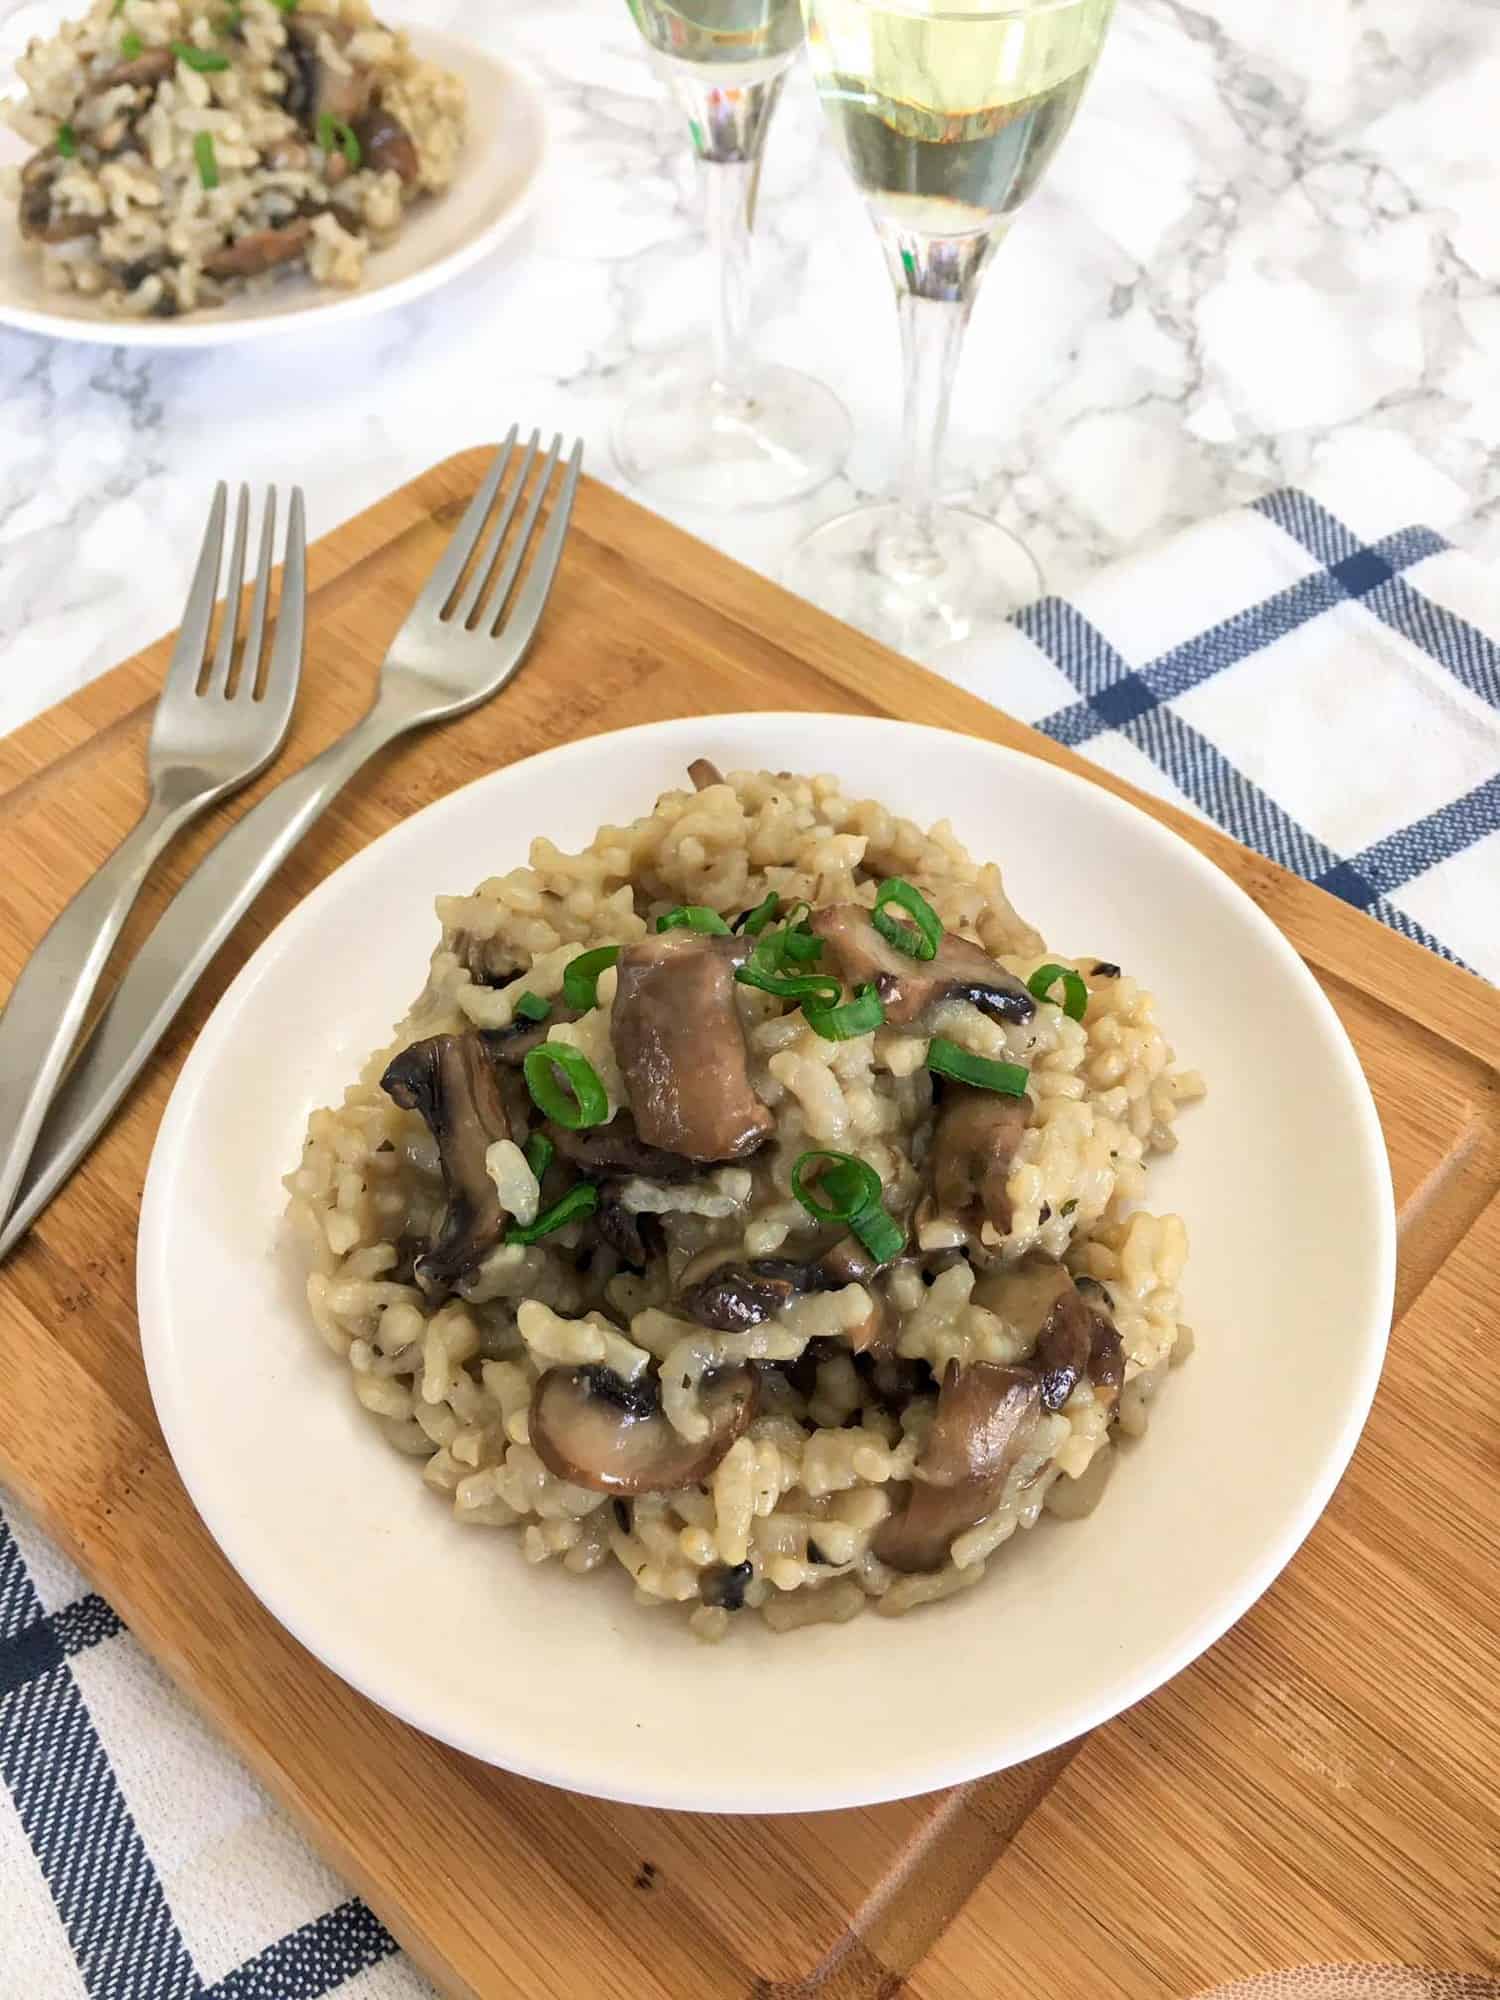 Mushroom risotto in white plate with green onion garnish.